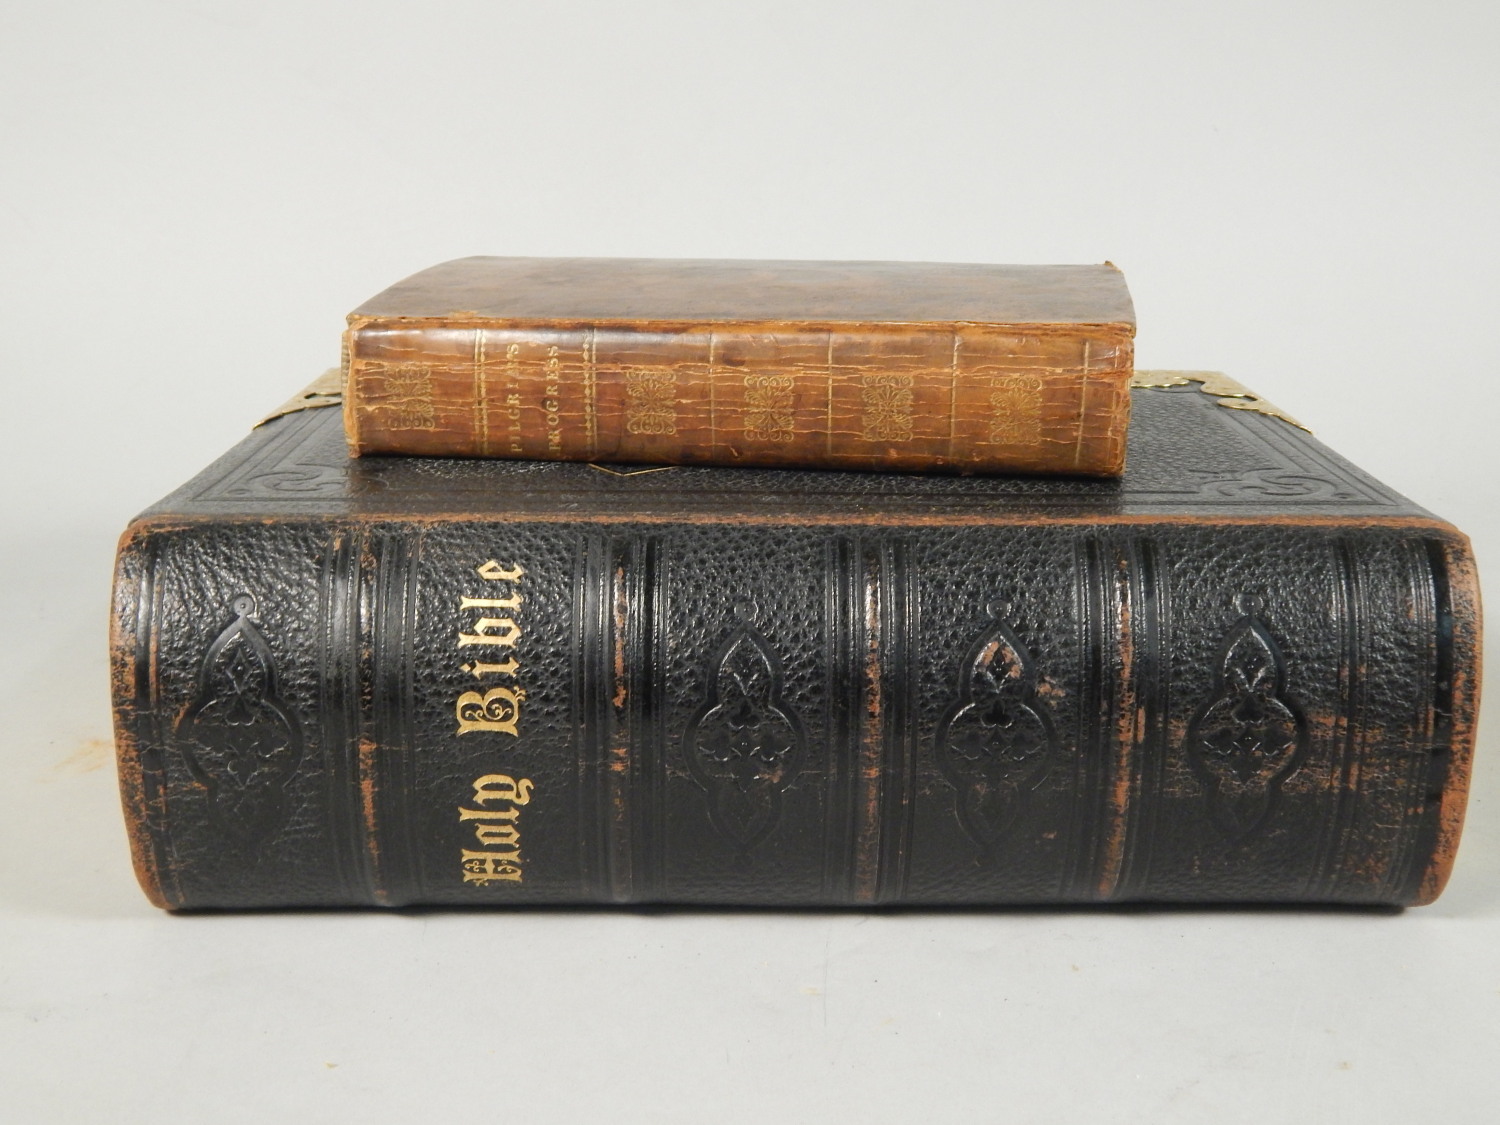 Illustrated Holy Bible, leather binding and brass clasp, and a copy of Pilgrims Progress from 1824.